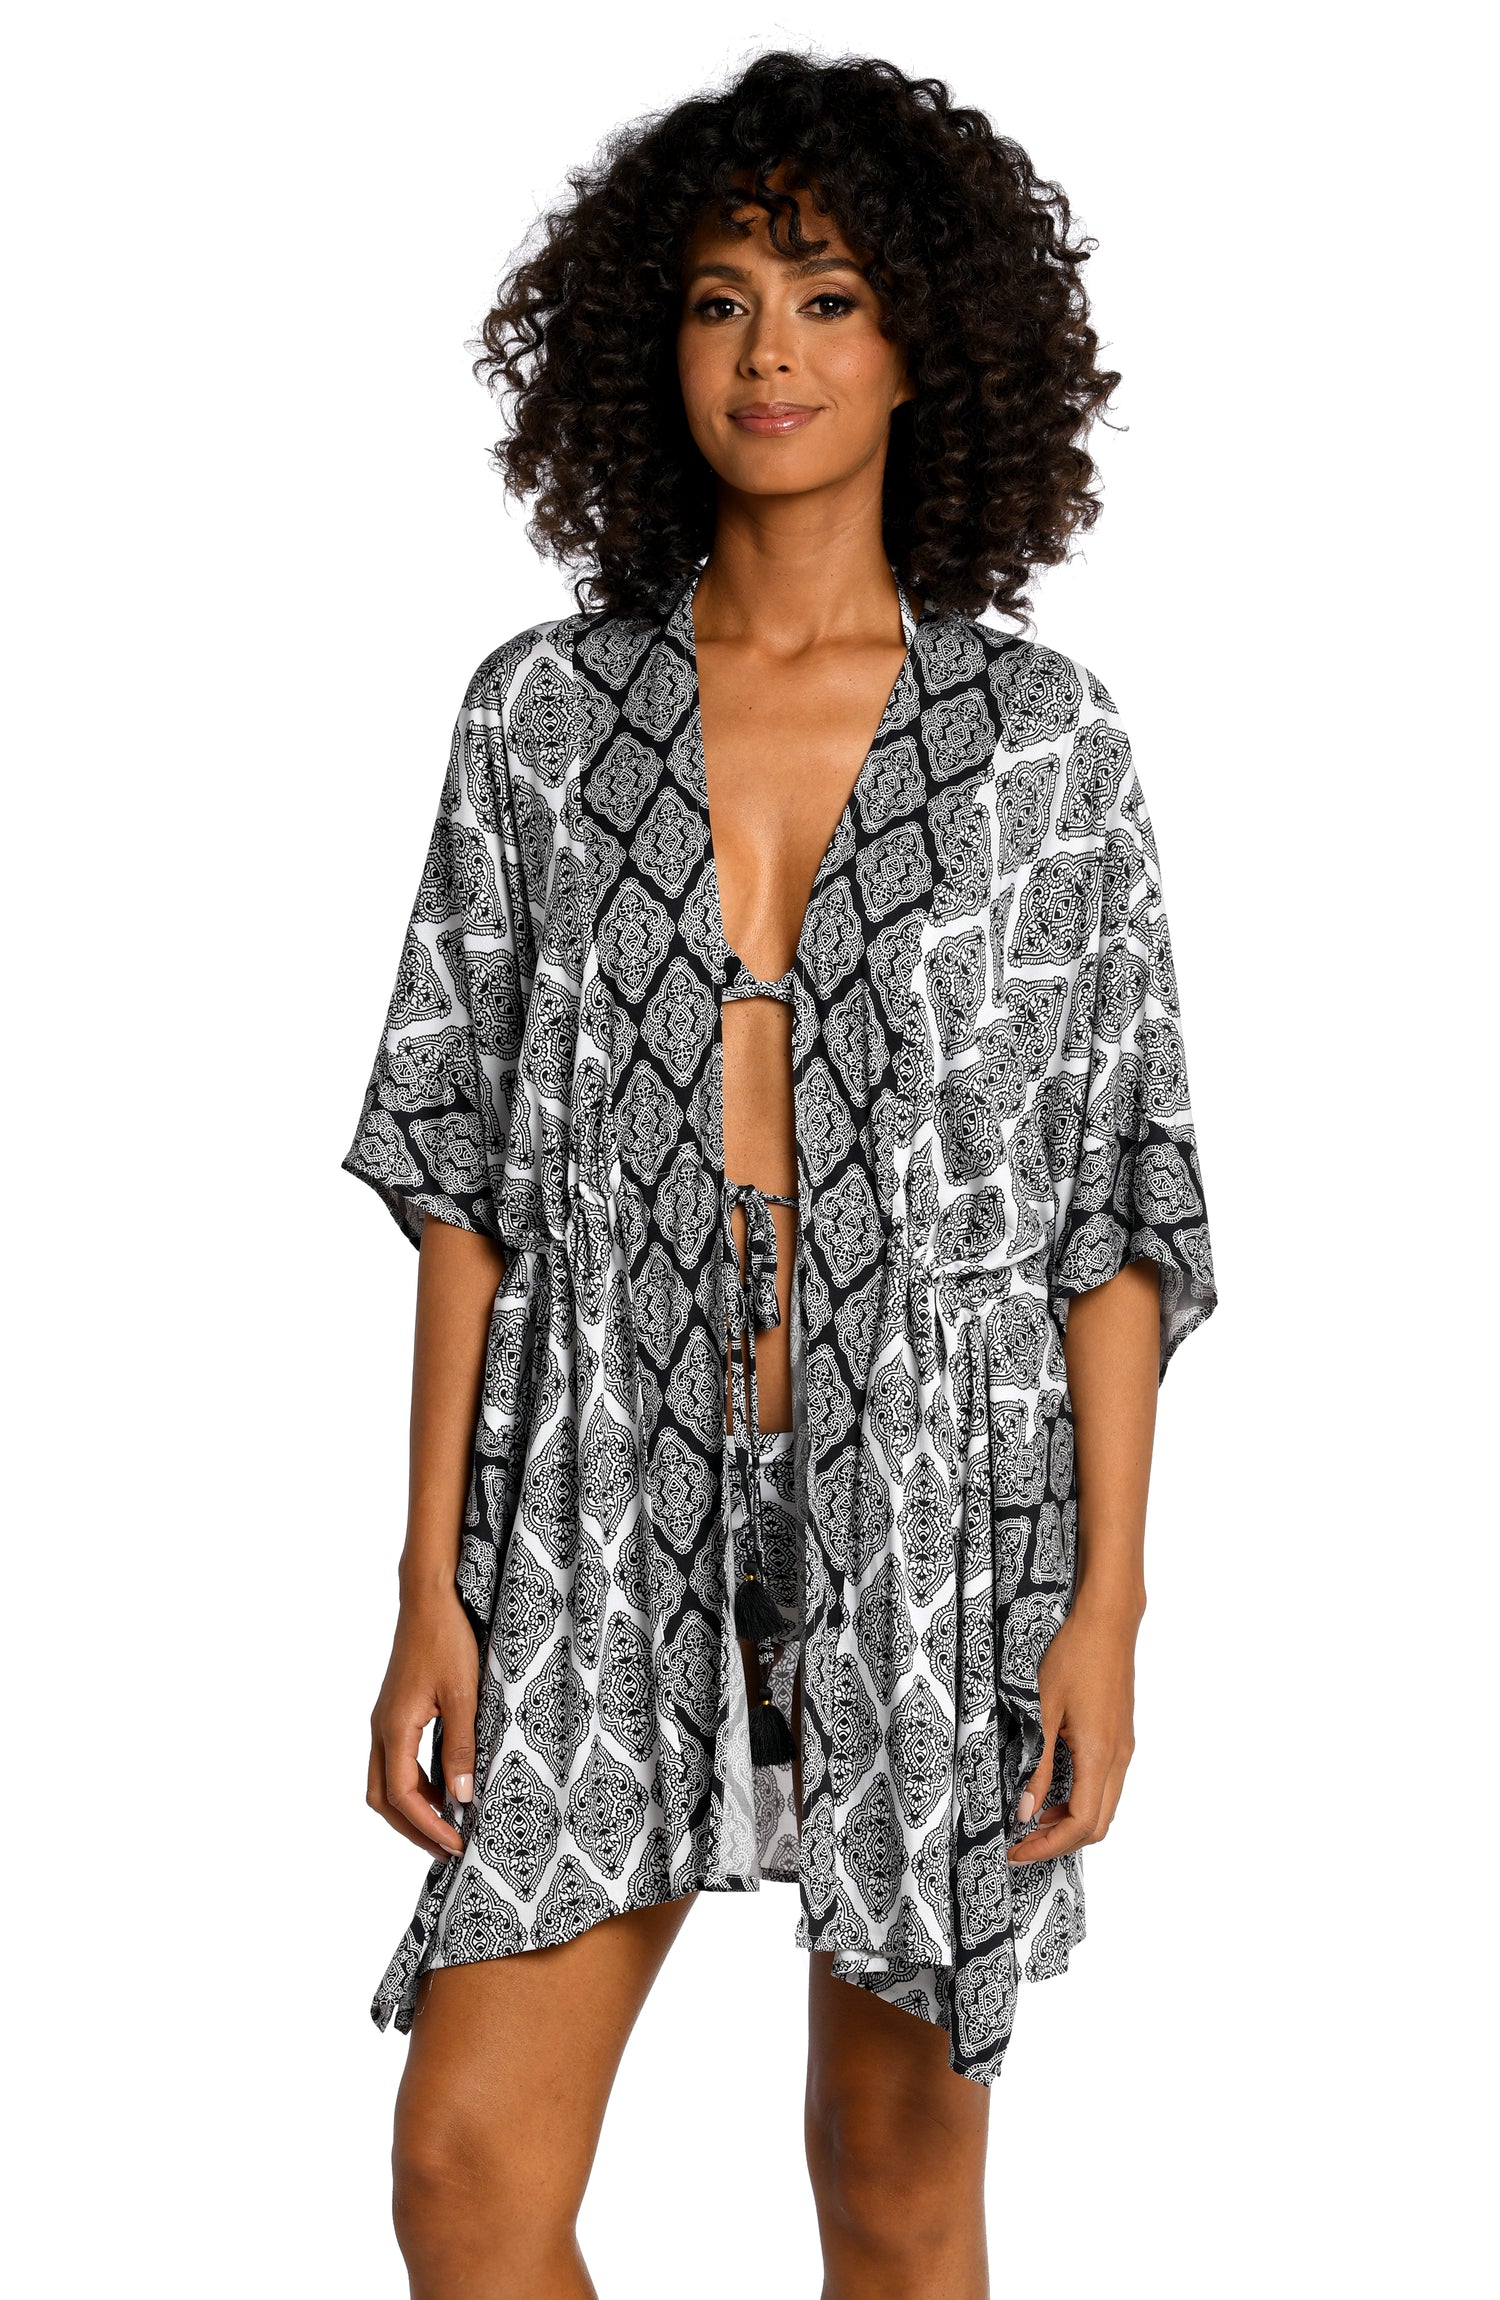 Model is wearing a black and white geometric printed kimono cover up from our Oasis Tile collection!